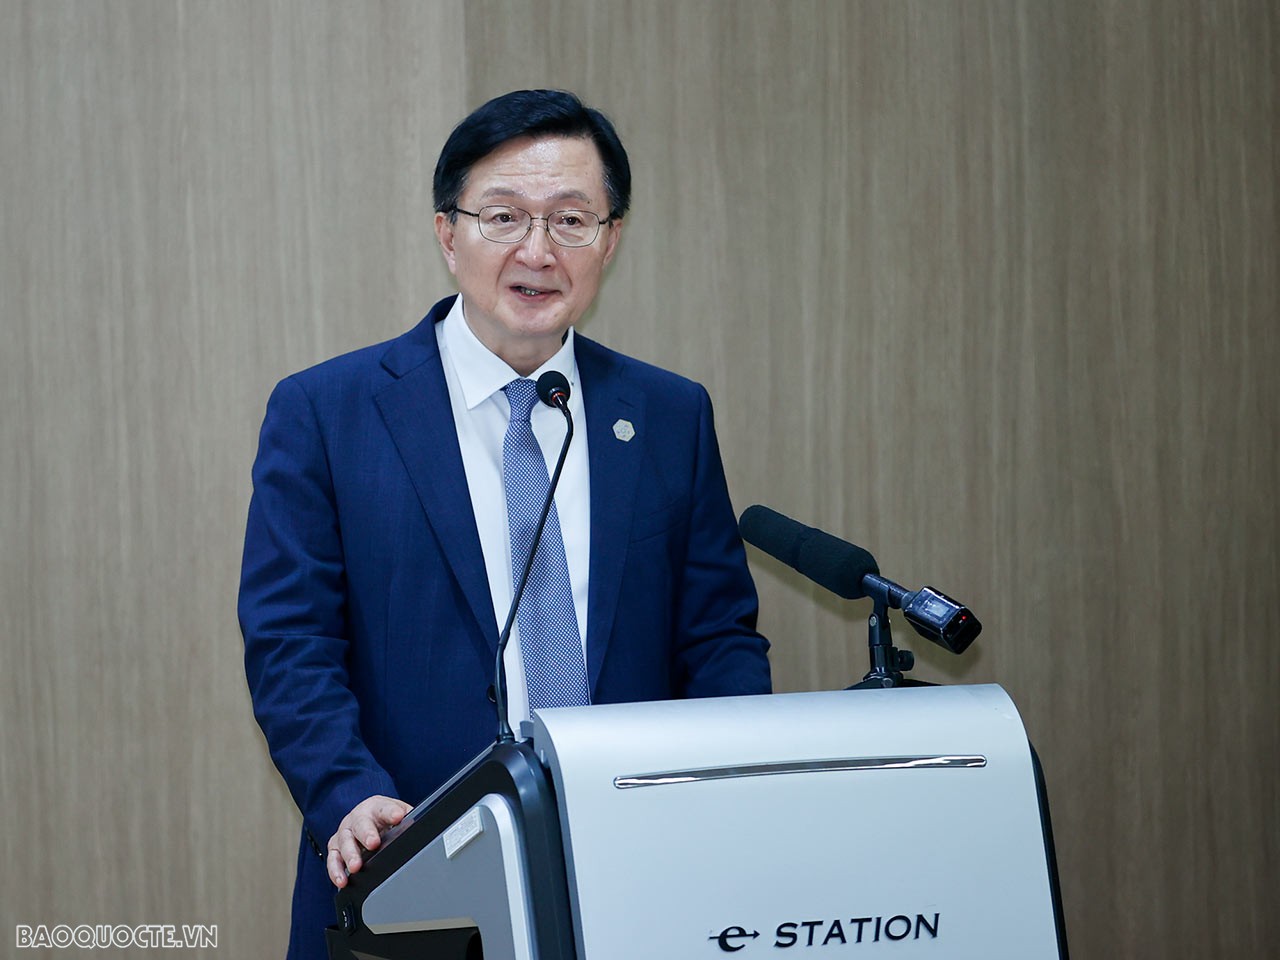 PM Pham Minh Chinh delivers policy speech at Seoul National University